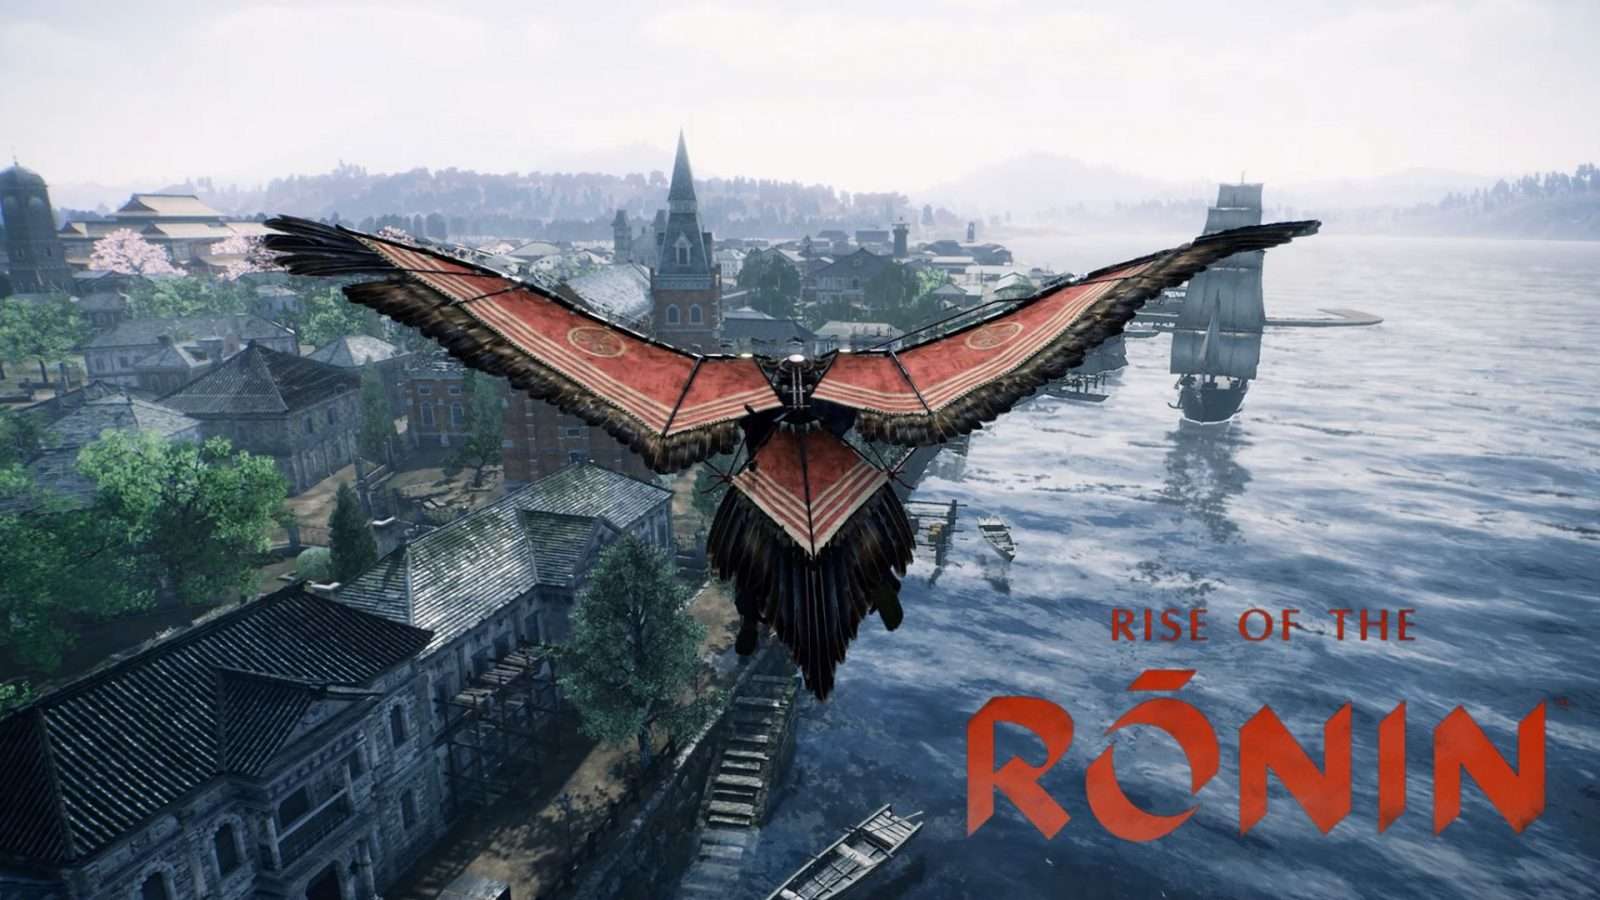 character flying in rise of the ronin